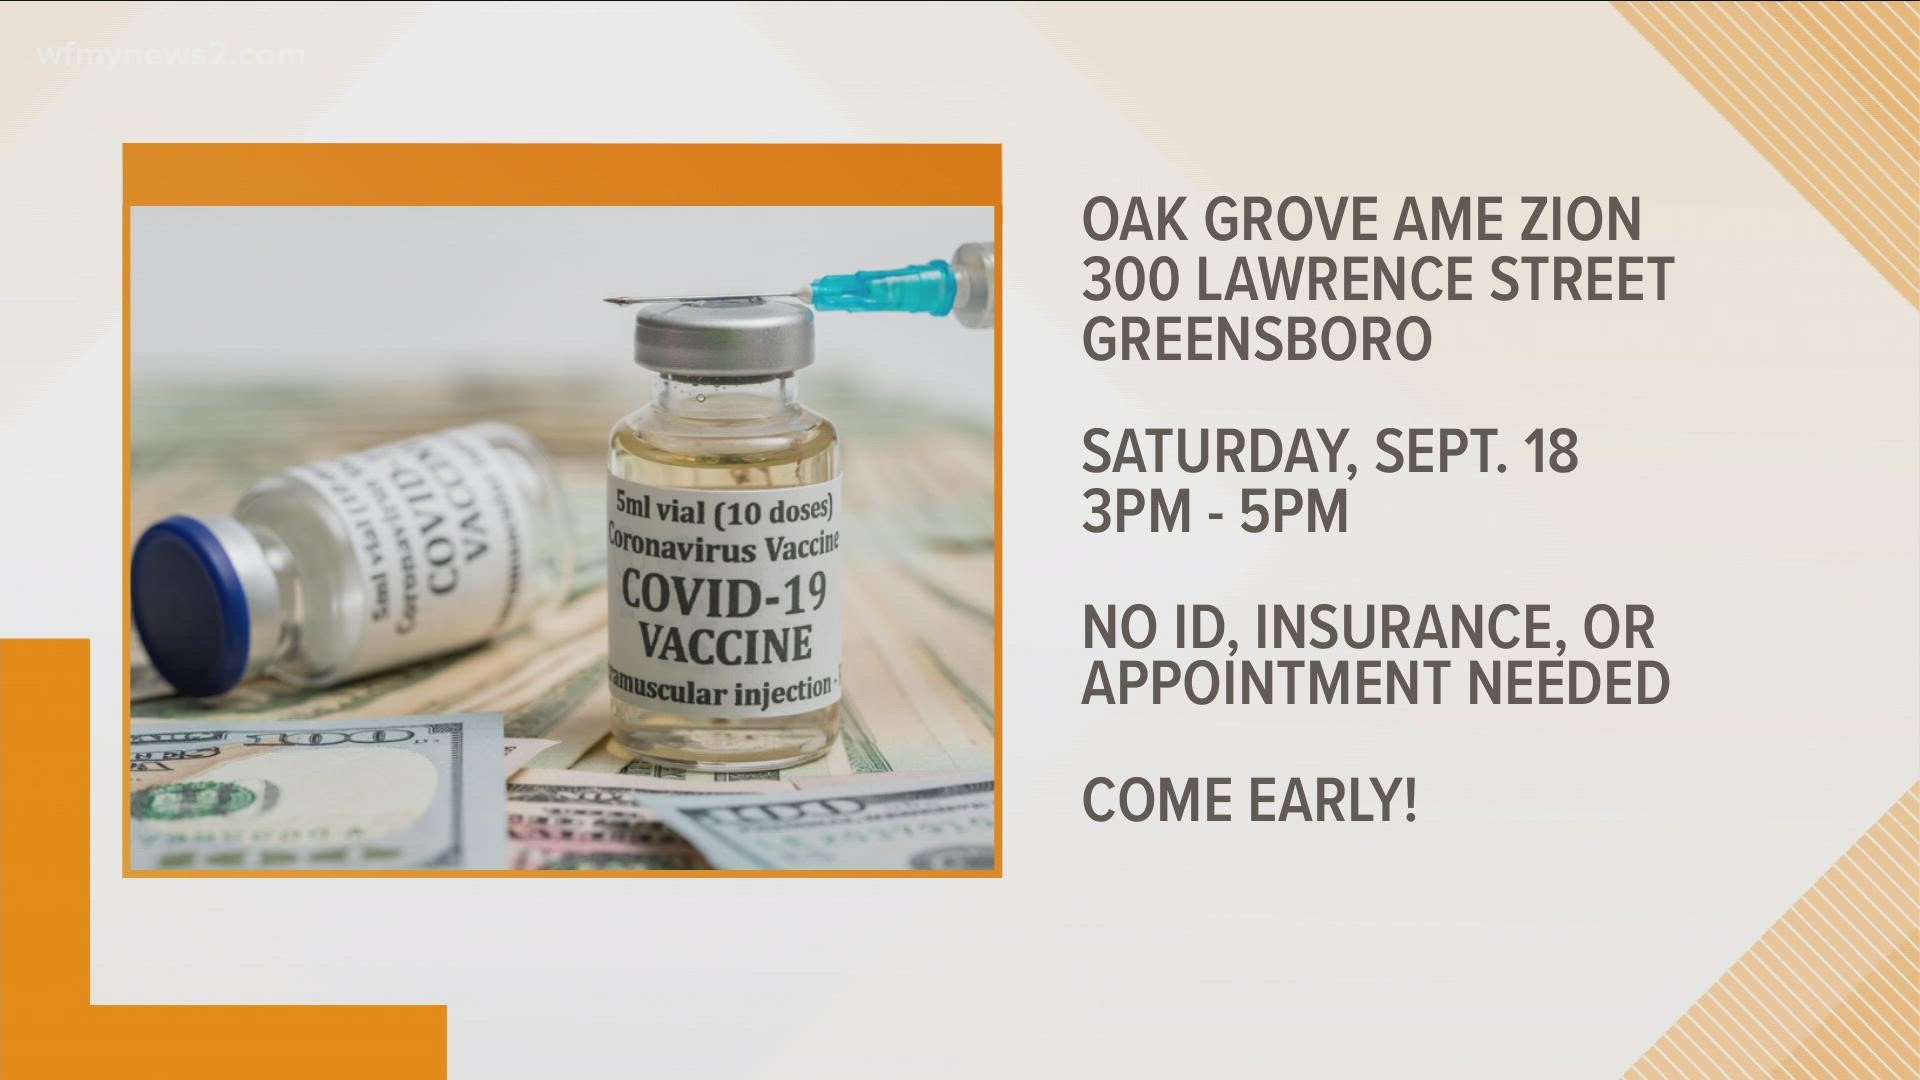 Oak Grove AME Zion Church in Greensboro is giving you a $10 gift card when you get a COVID test or a $100 gift card with your first dose of a COVID vaccine.